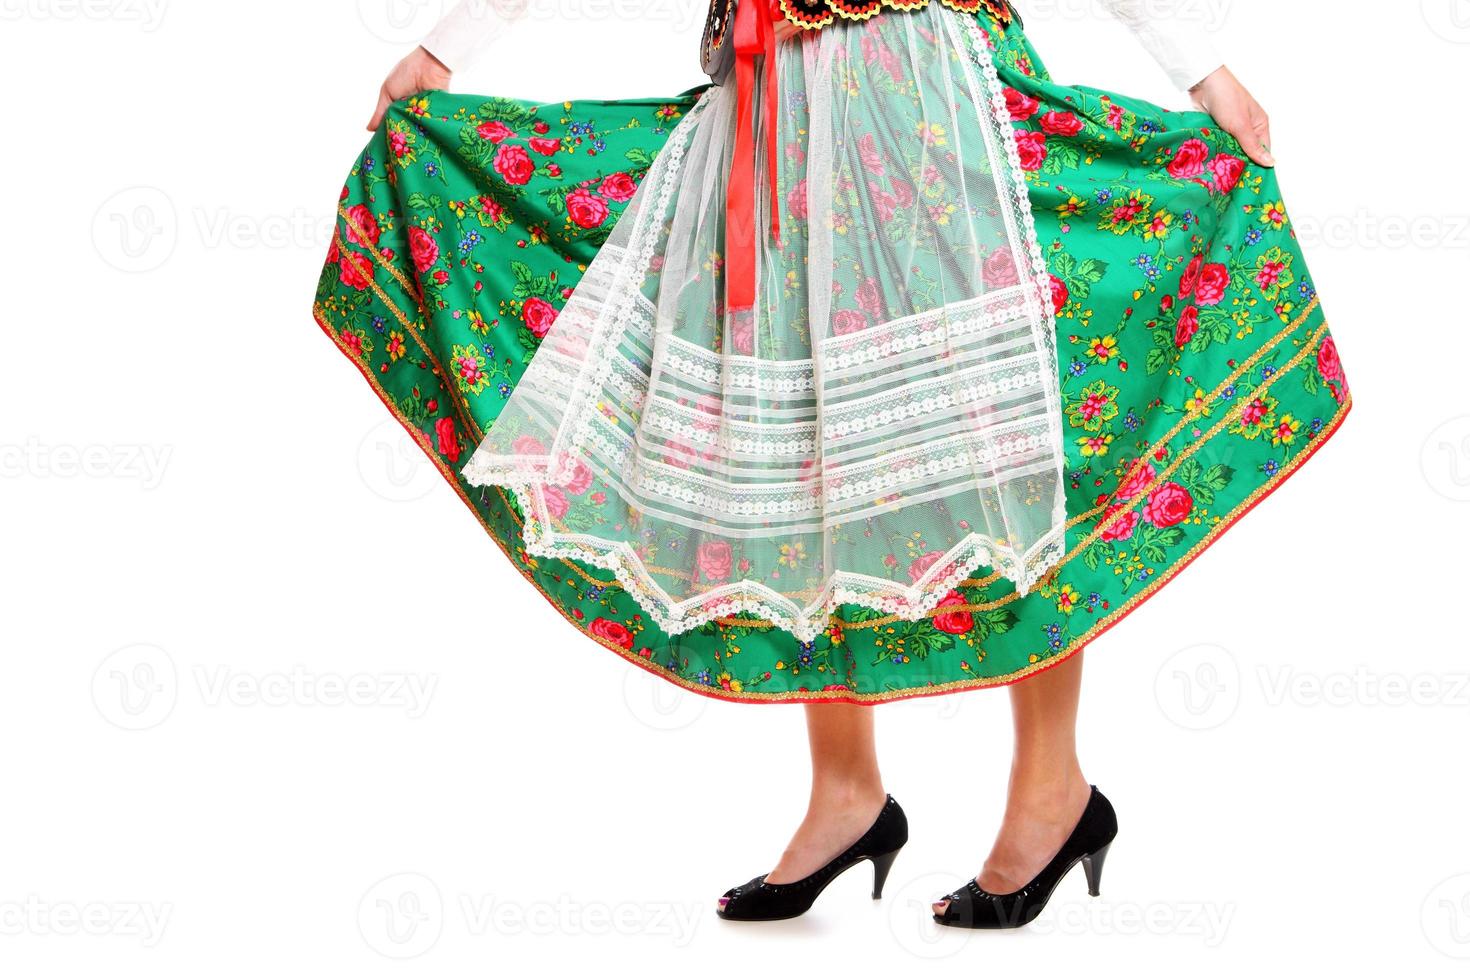 Polish girl in a traditional outfit photo